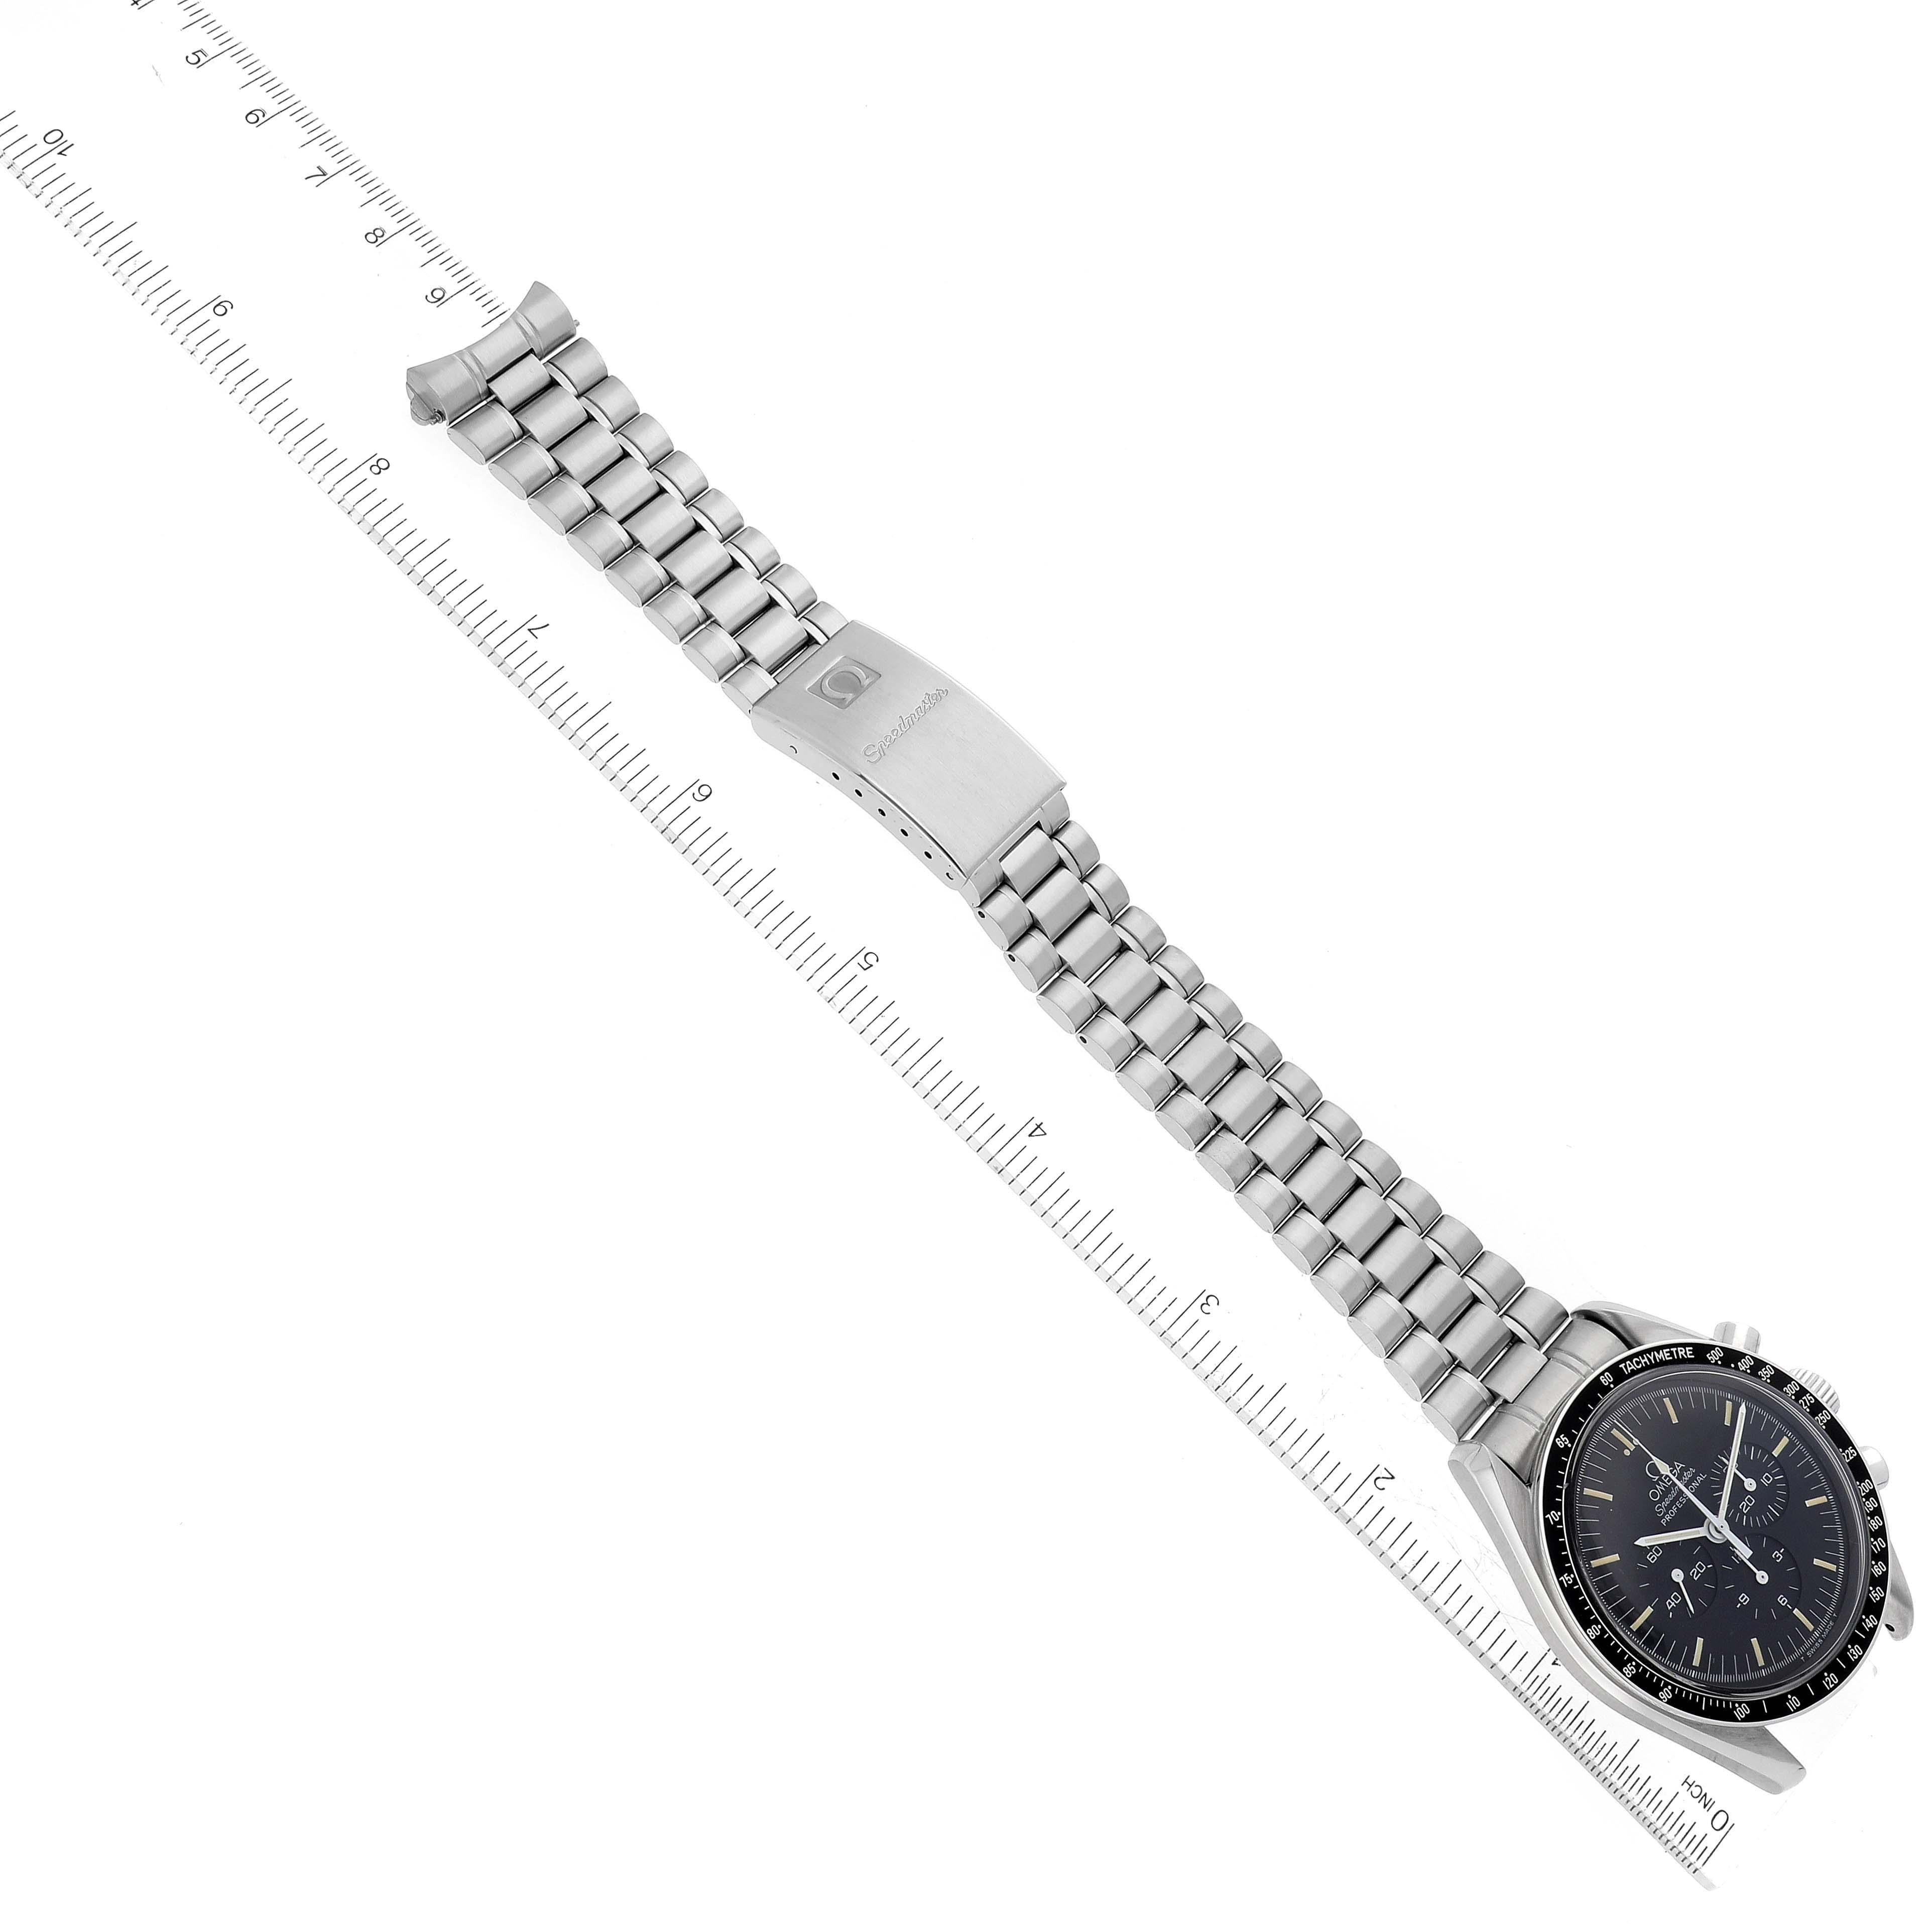 Omega Speedmaster Professional Moonwatch Steel Mens Watch 3592.50.00 Card For Sale 1